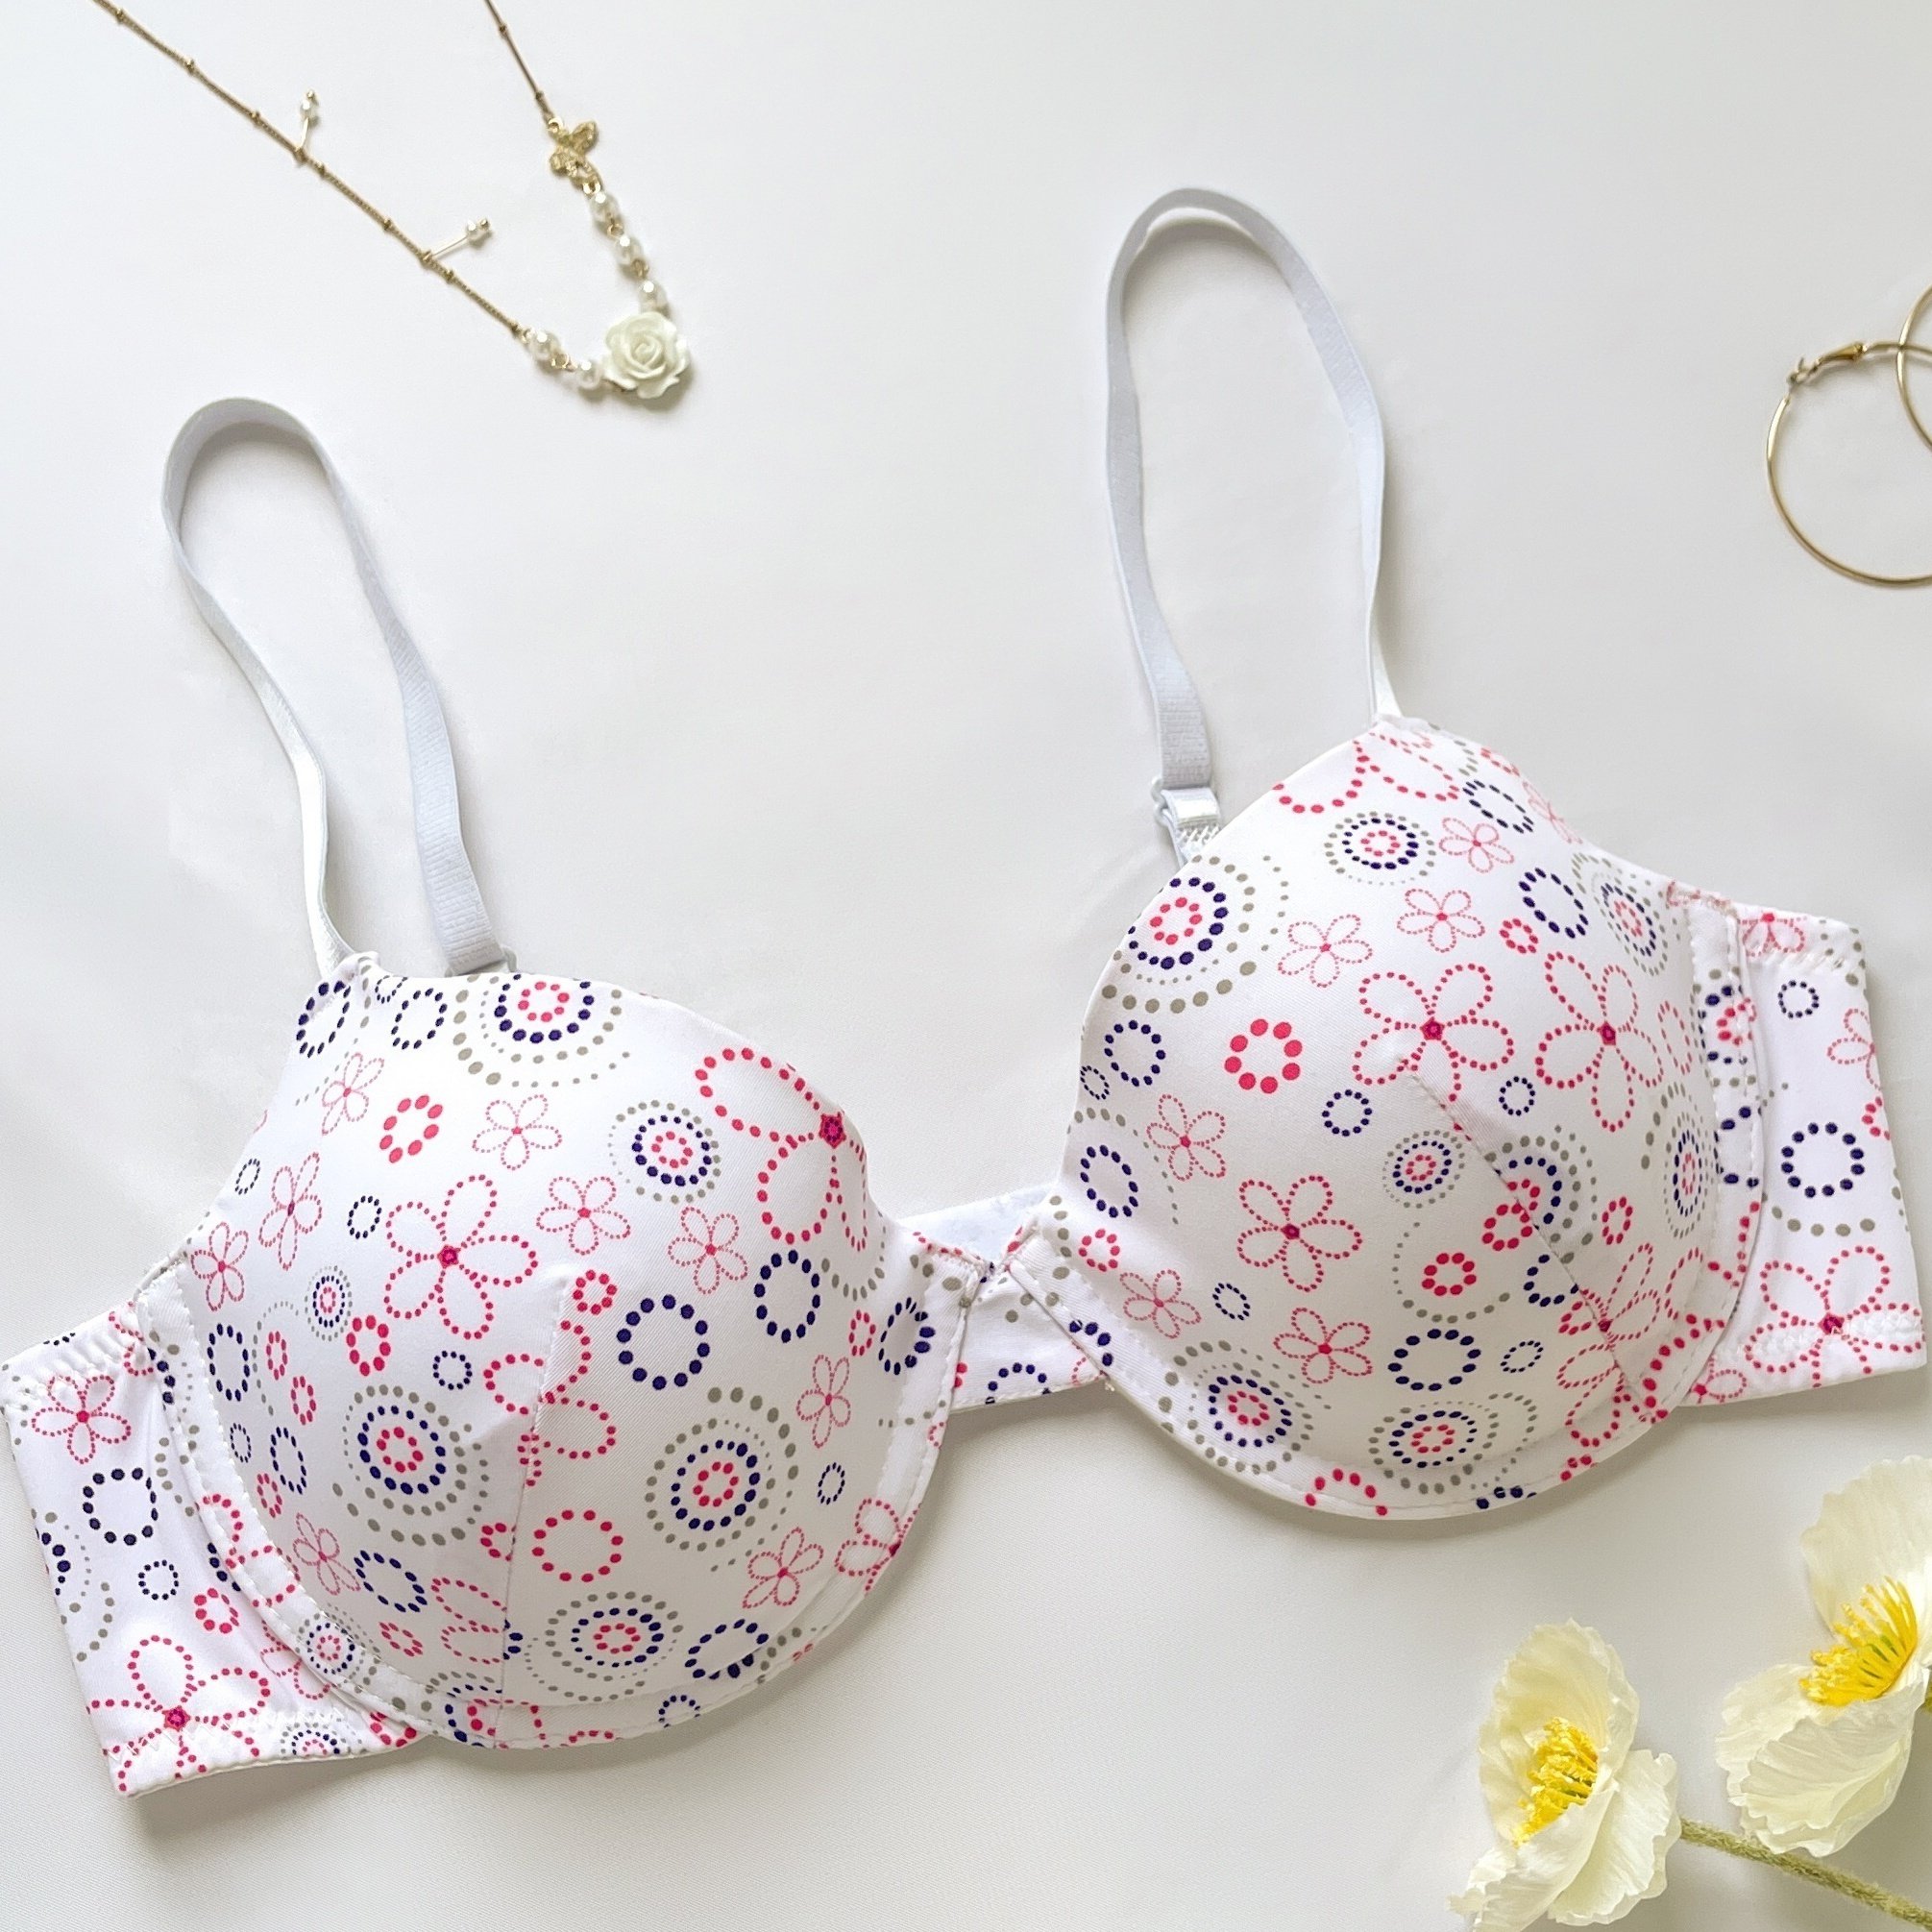 Floral Print Push Up Bra, Comfy & Breathable Full Coverage Everyday Bra,  Women's Lingerie & Underwear